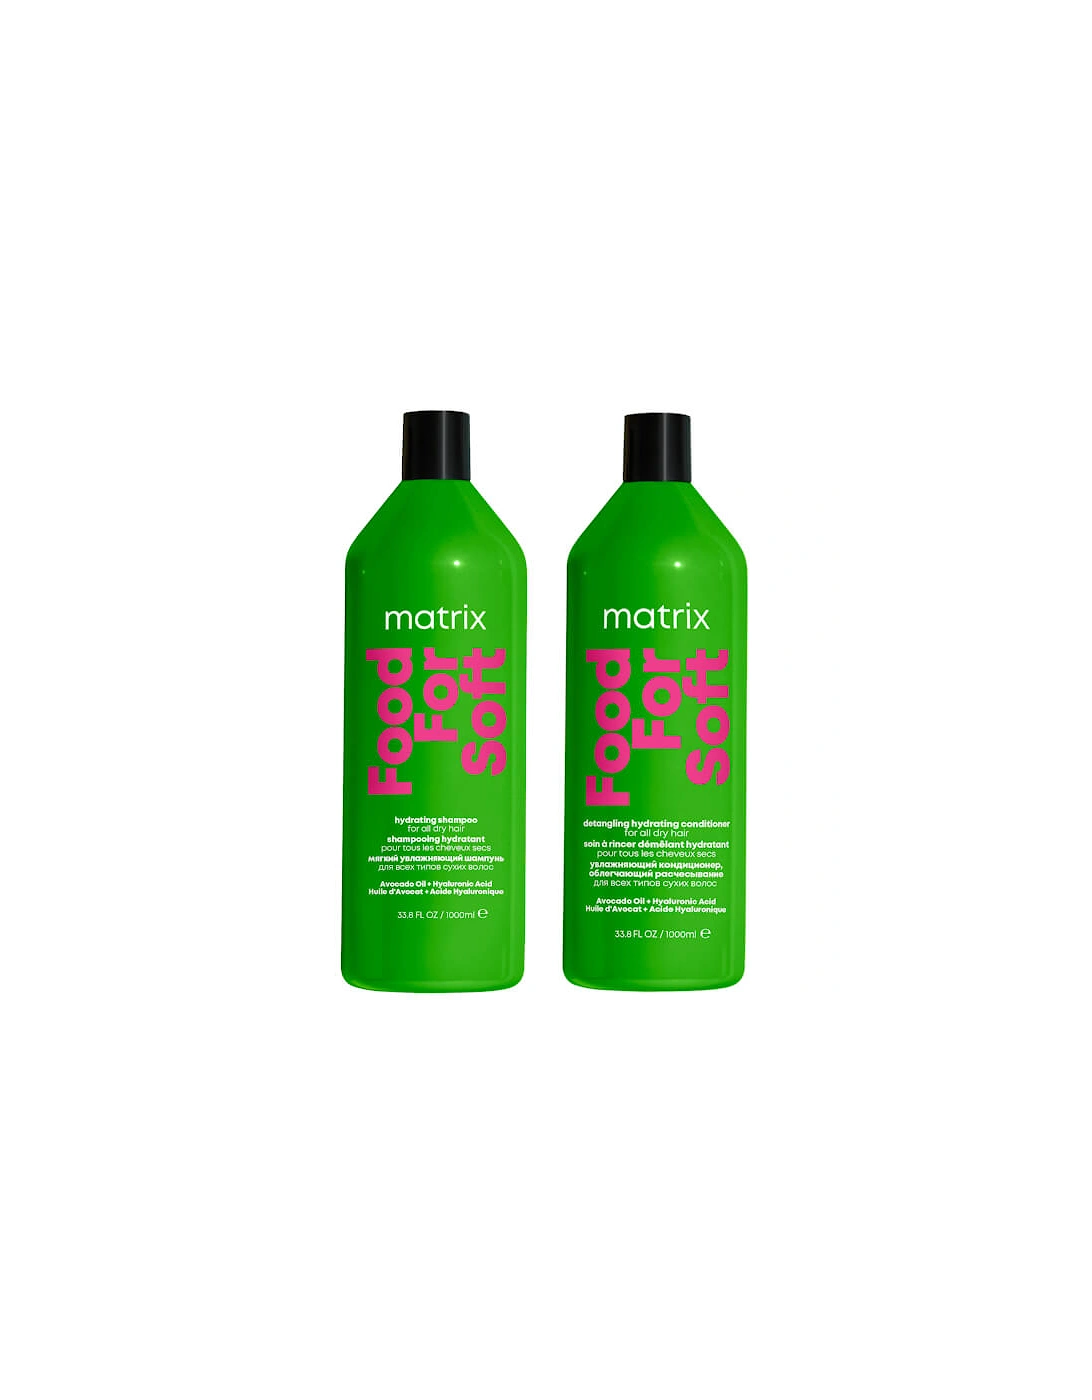 Food for Soft Hydrating 1000ml Shampoo and Conditioner with Avocado Oil and Hyaluronic Acid for Dry Hair Duo, 2 of 1